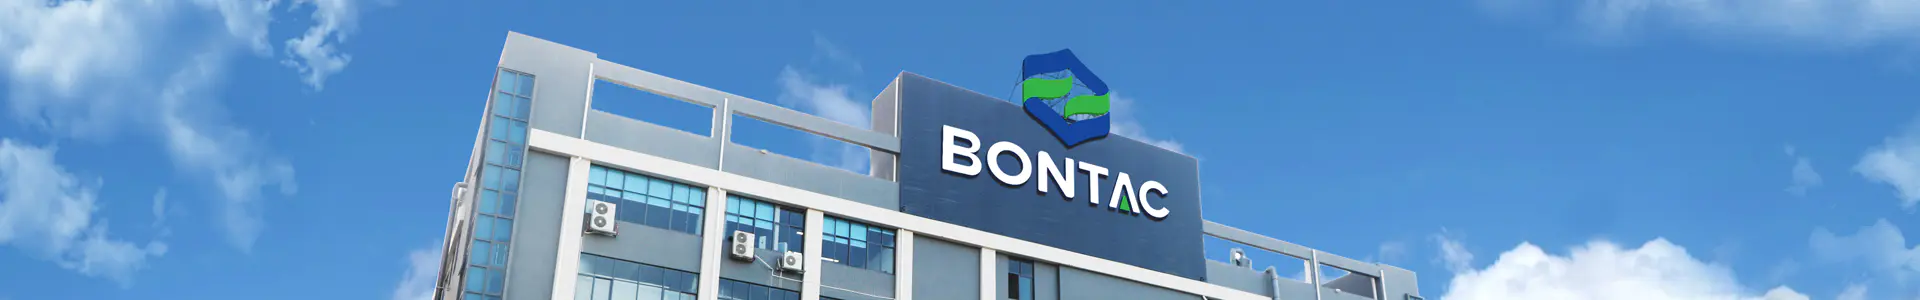 About Us: Story of a Leading Supplier of Raw Materials for Supplements - Bontac